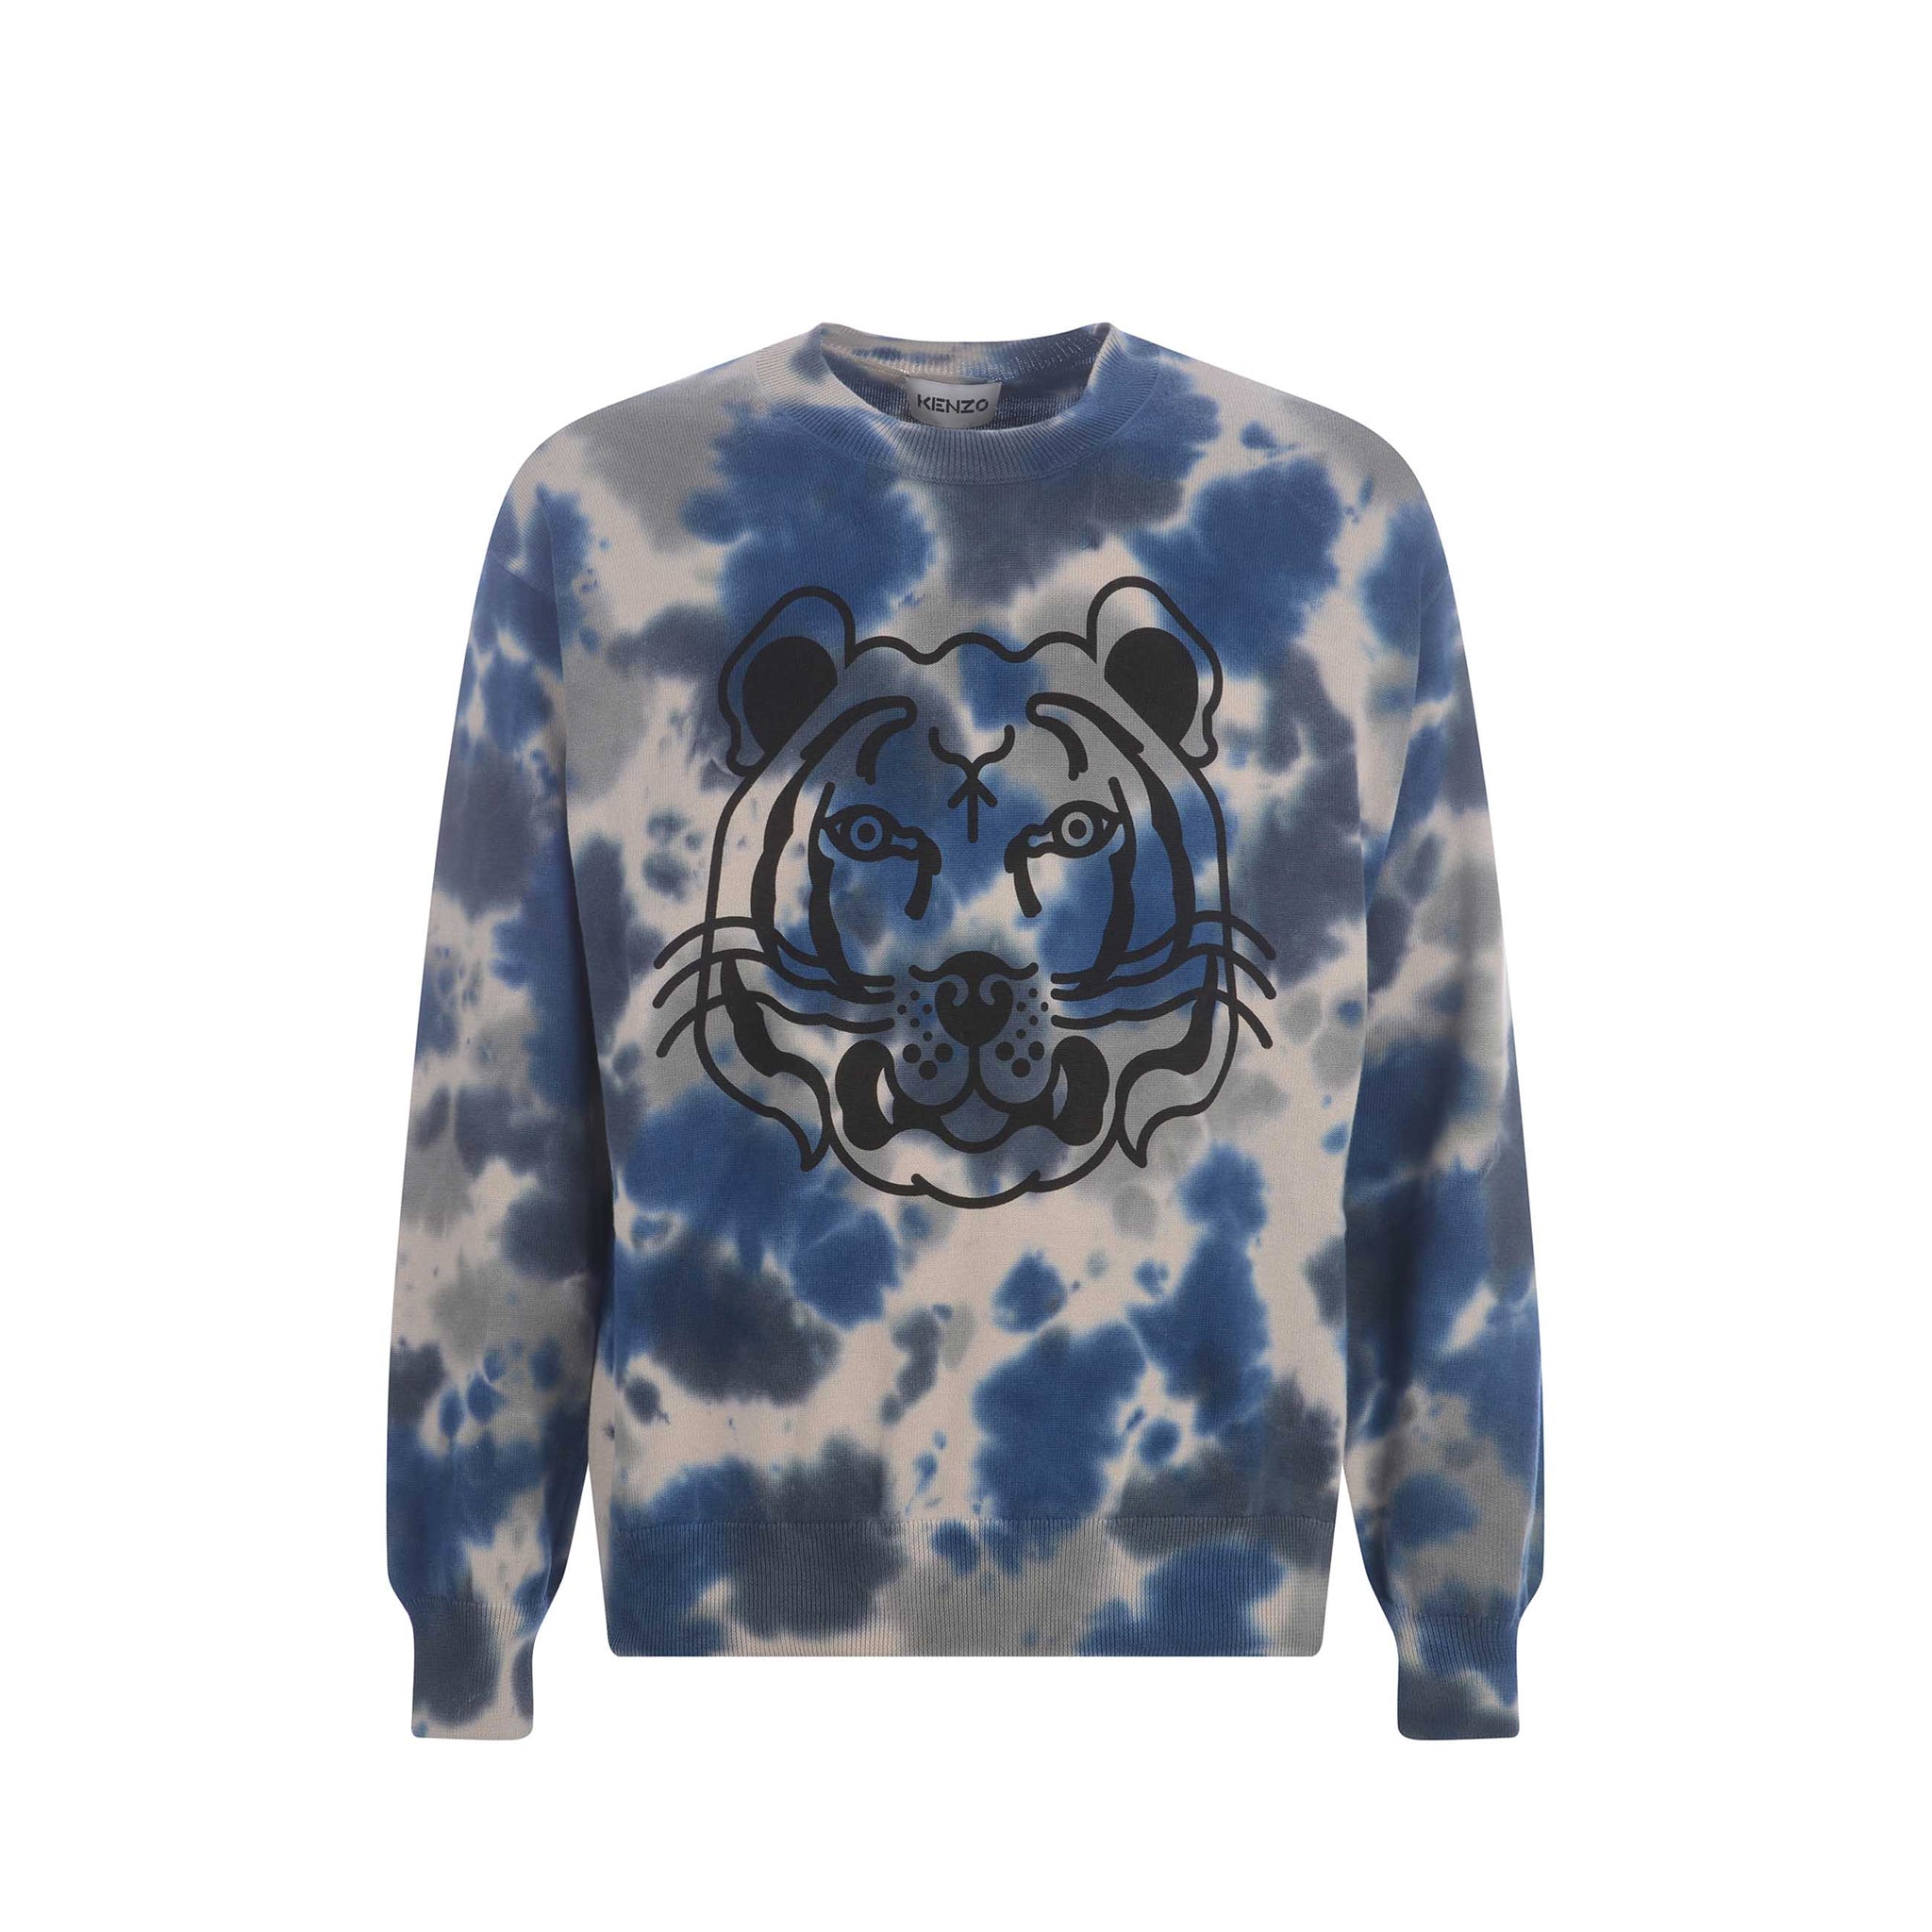 KENZO-OUTLET-SALE-Kenzo-Cotton-Printed-Sweater-Strick-ARCHIVE-COLLECTION.jpg